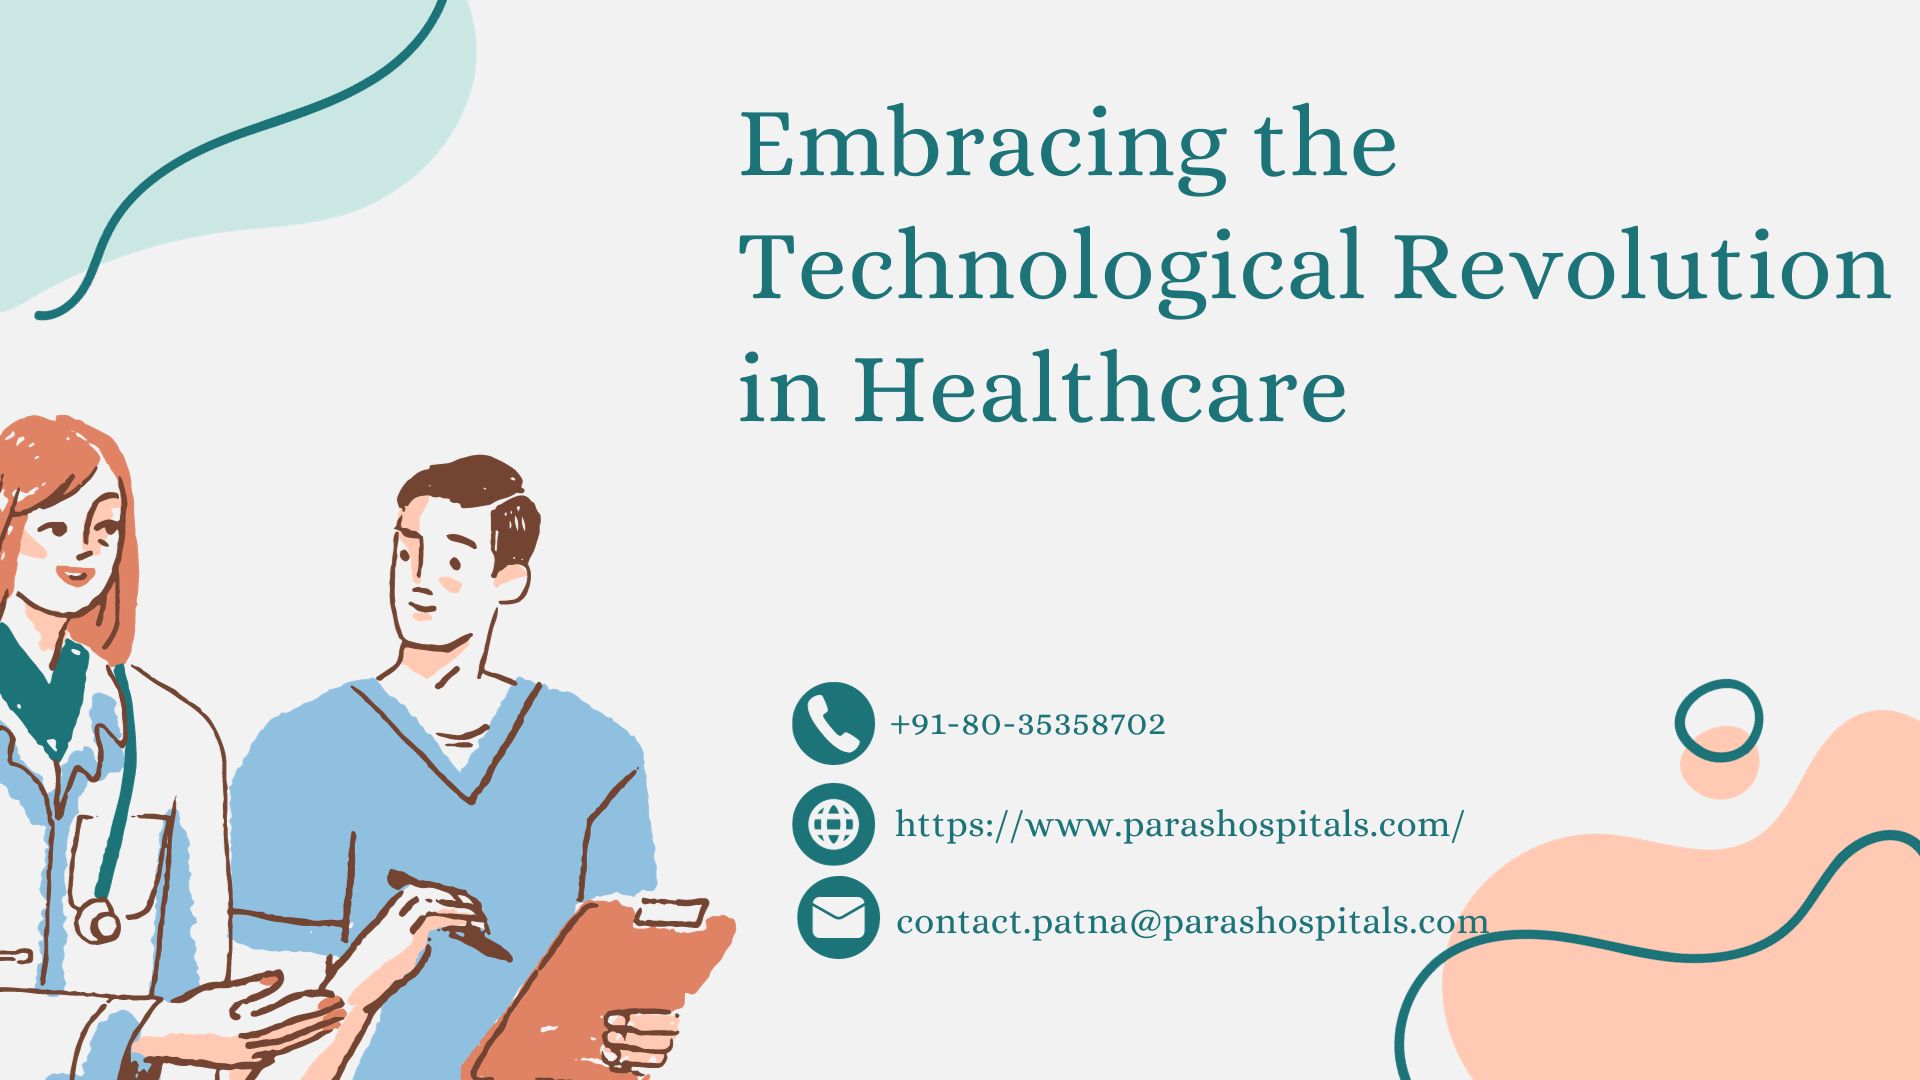 Embracing the Technological Revolution in Healthcare